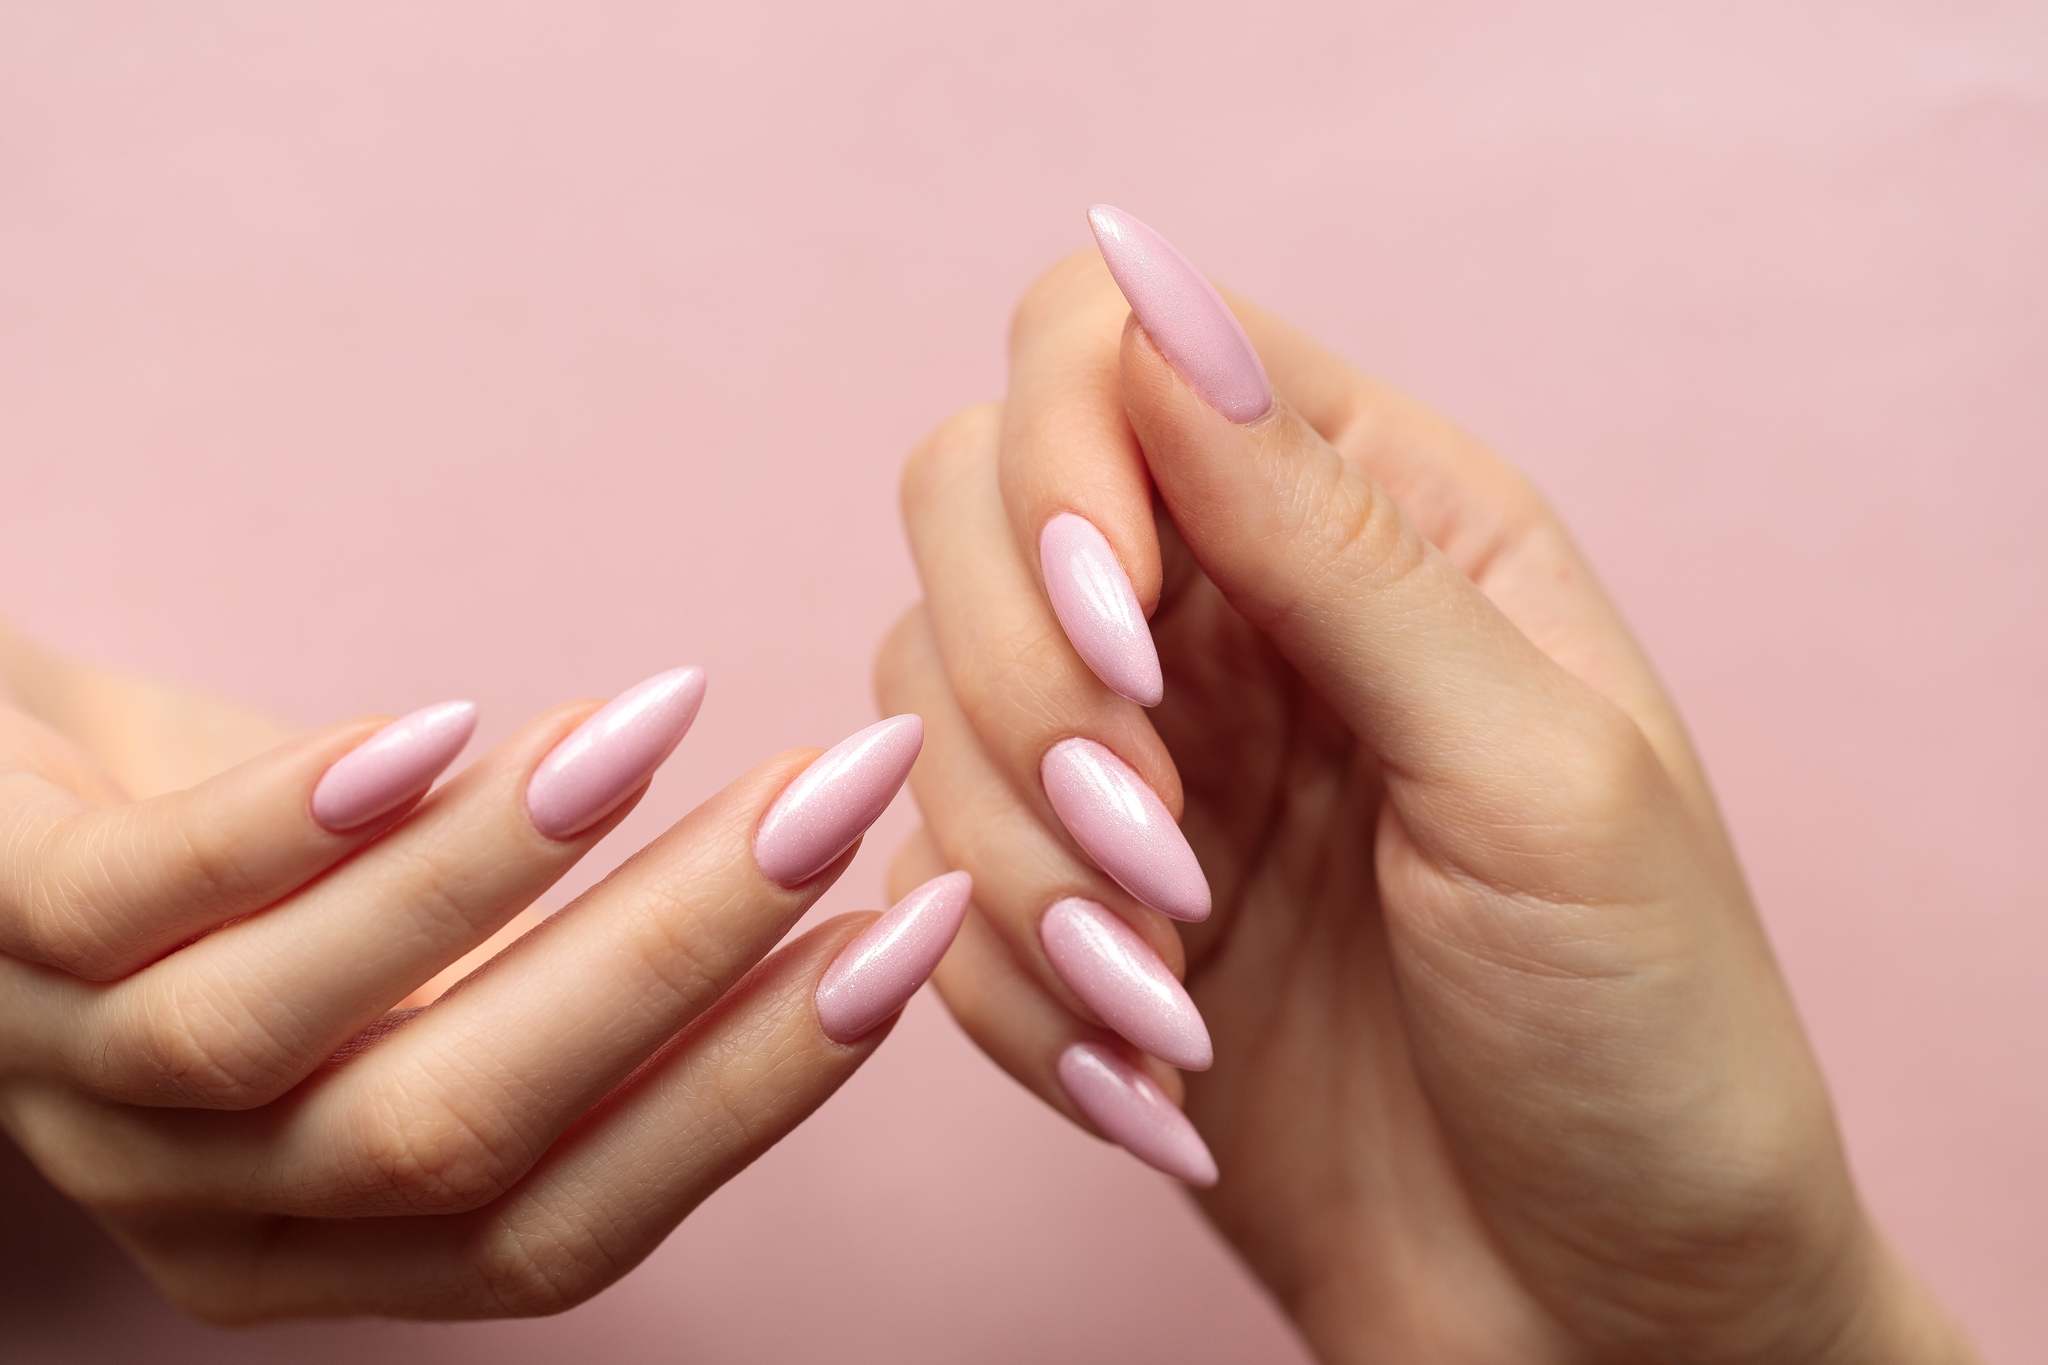 Why Soy? Surprising Benefits of Soy-Based Nail Polish Removers